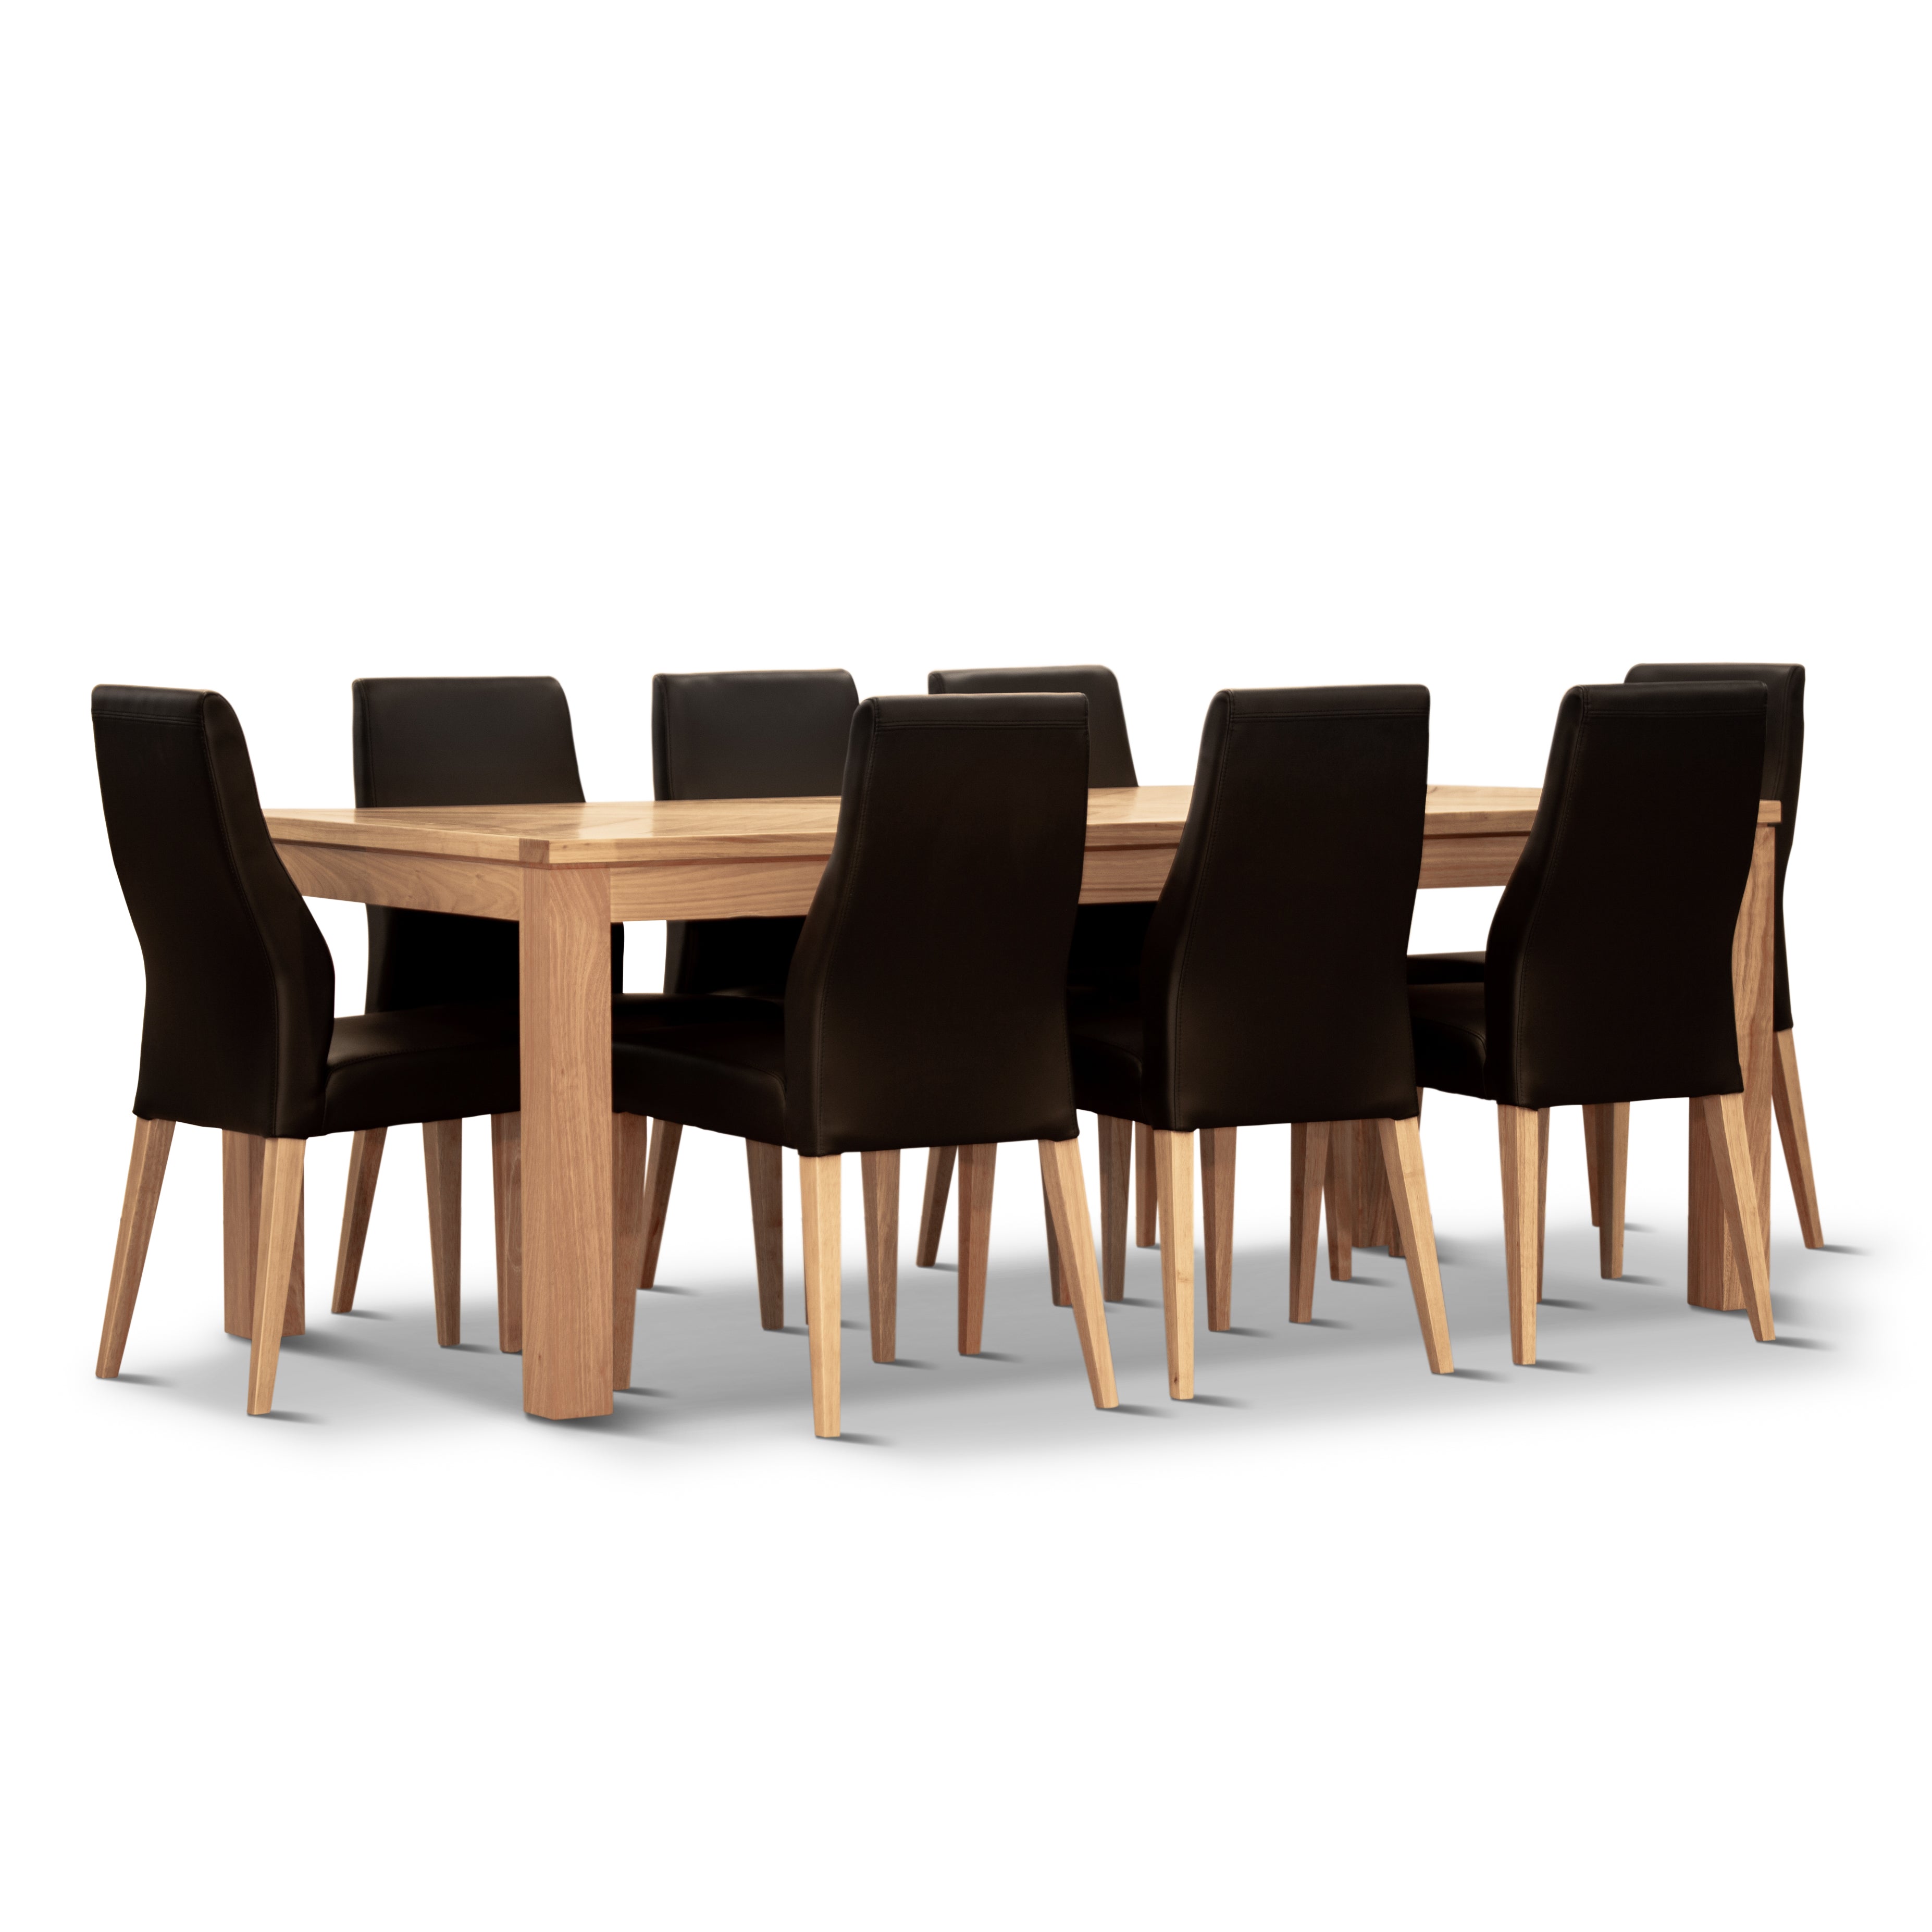 Rosemallow 9pc Dining Set 210cm Table 8 Black PU Chair Solid Messmate Timber - SILBERSHELL